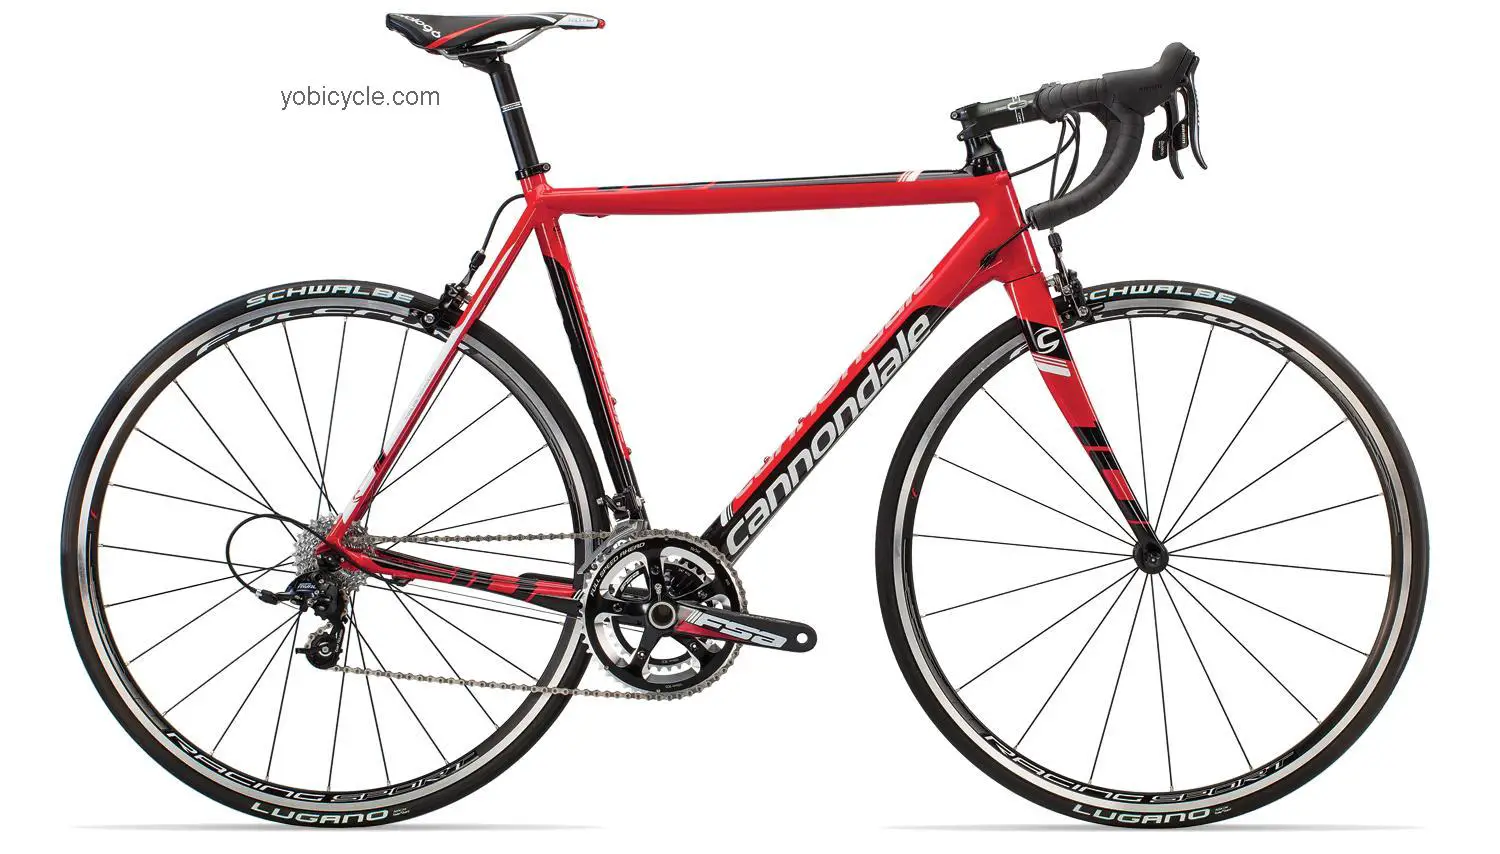 Cannondale CAAD10 4 Rival competitors and comparison tool online specs and performance